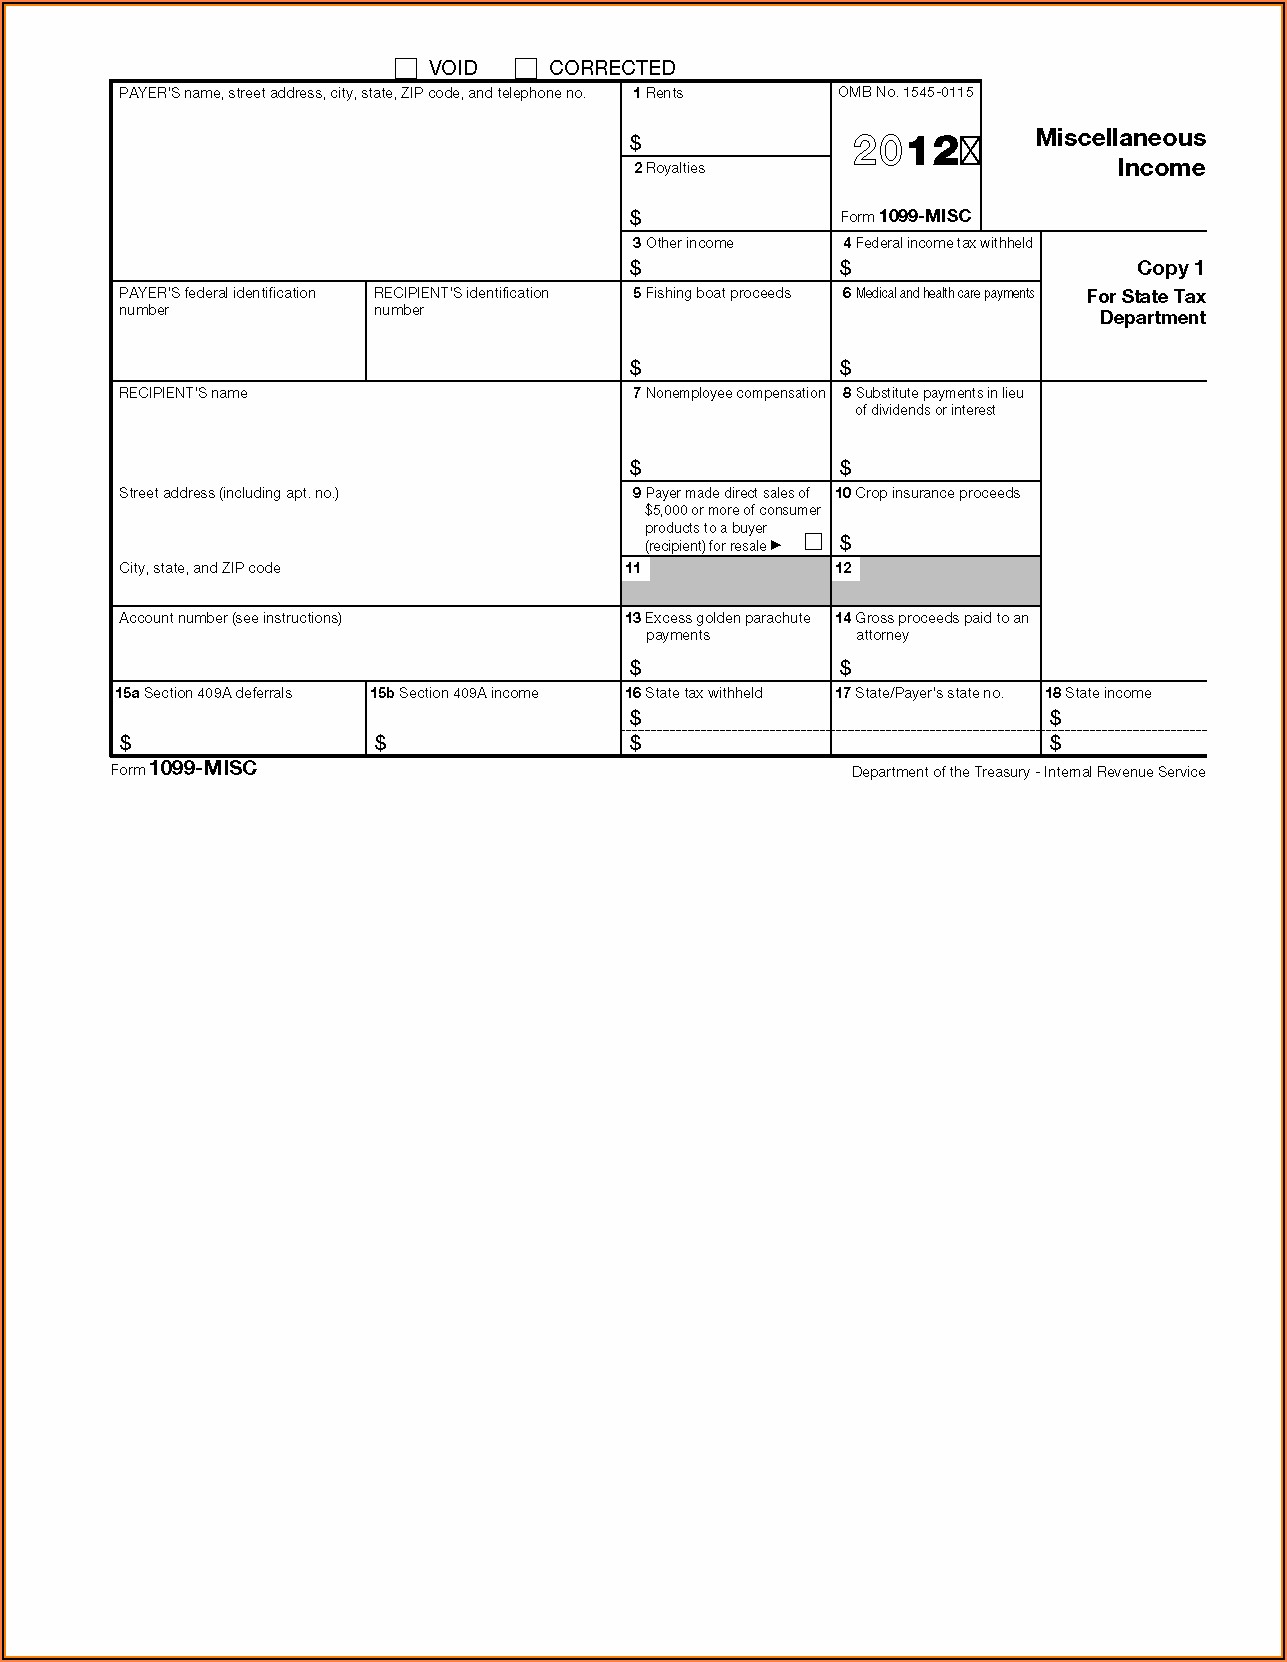 Miscellaneous Income Form 1099 Misc